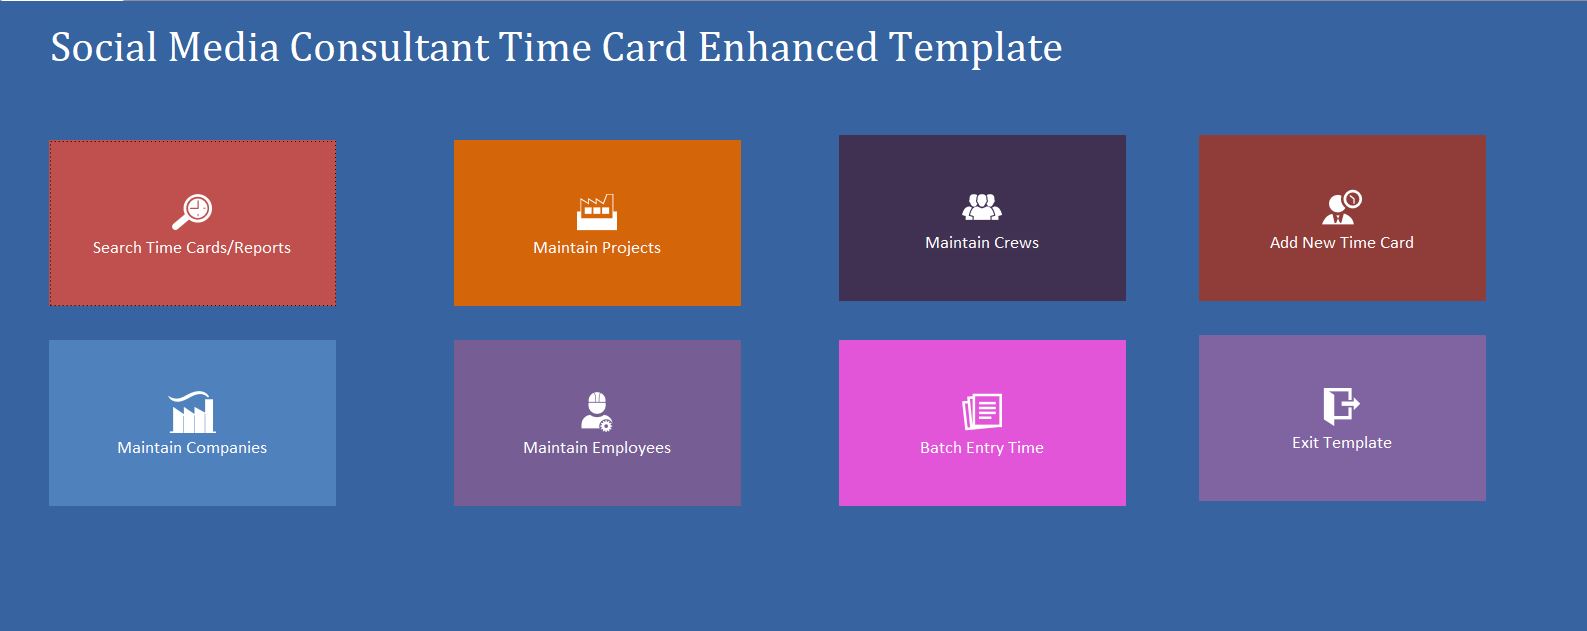 Enhanced Social Media Consultant Time Card Template | Time Card Database